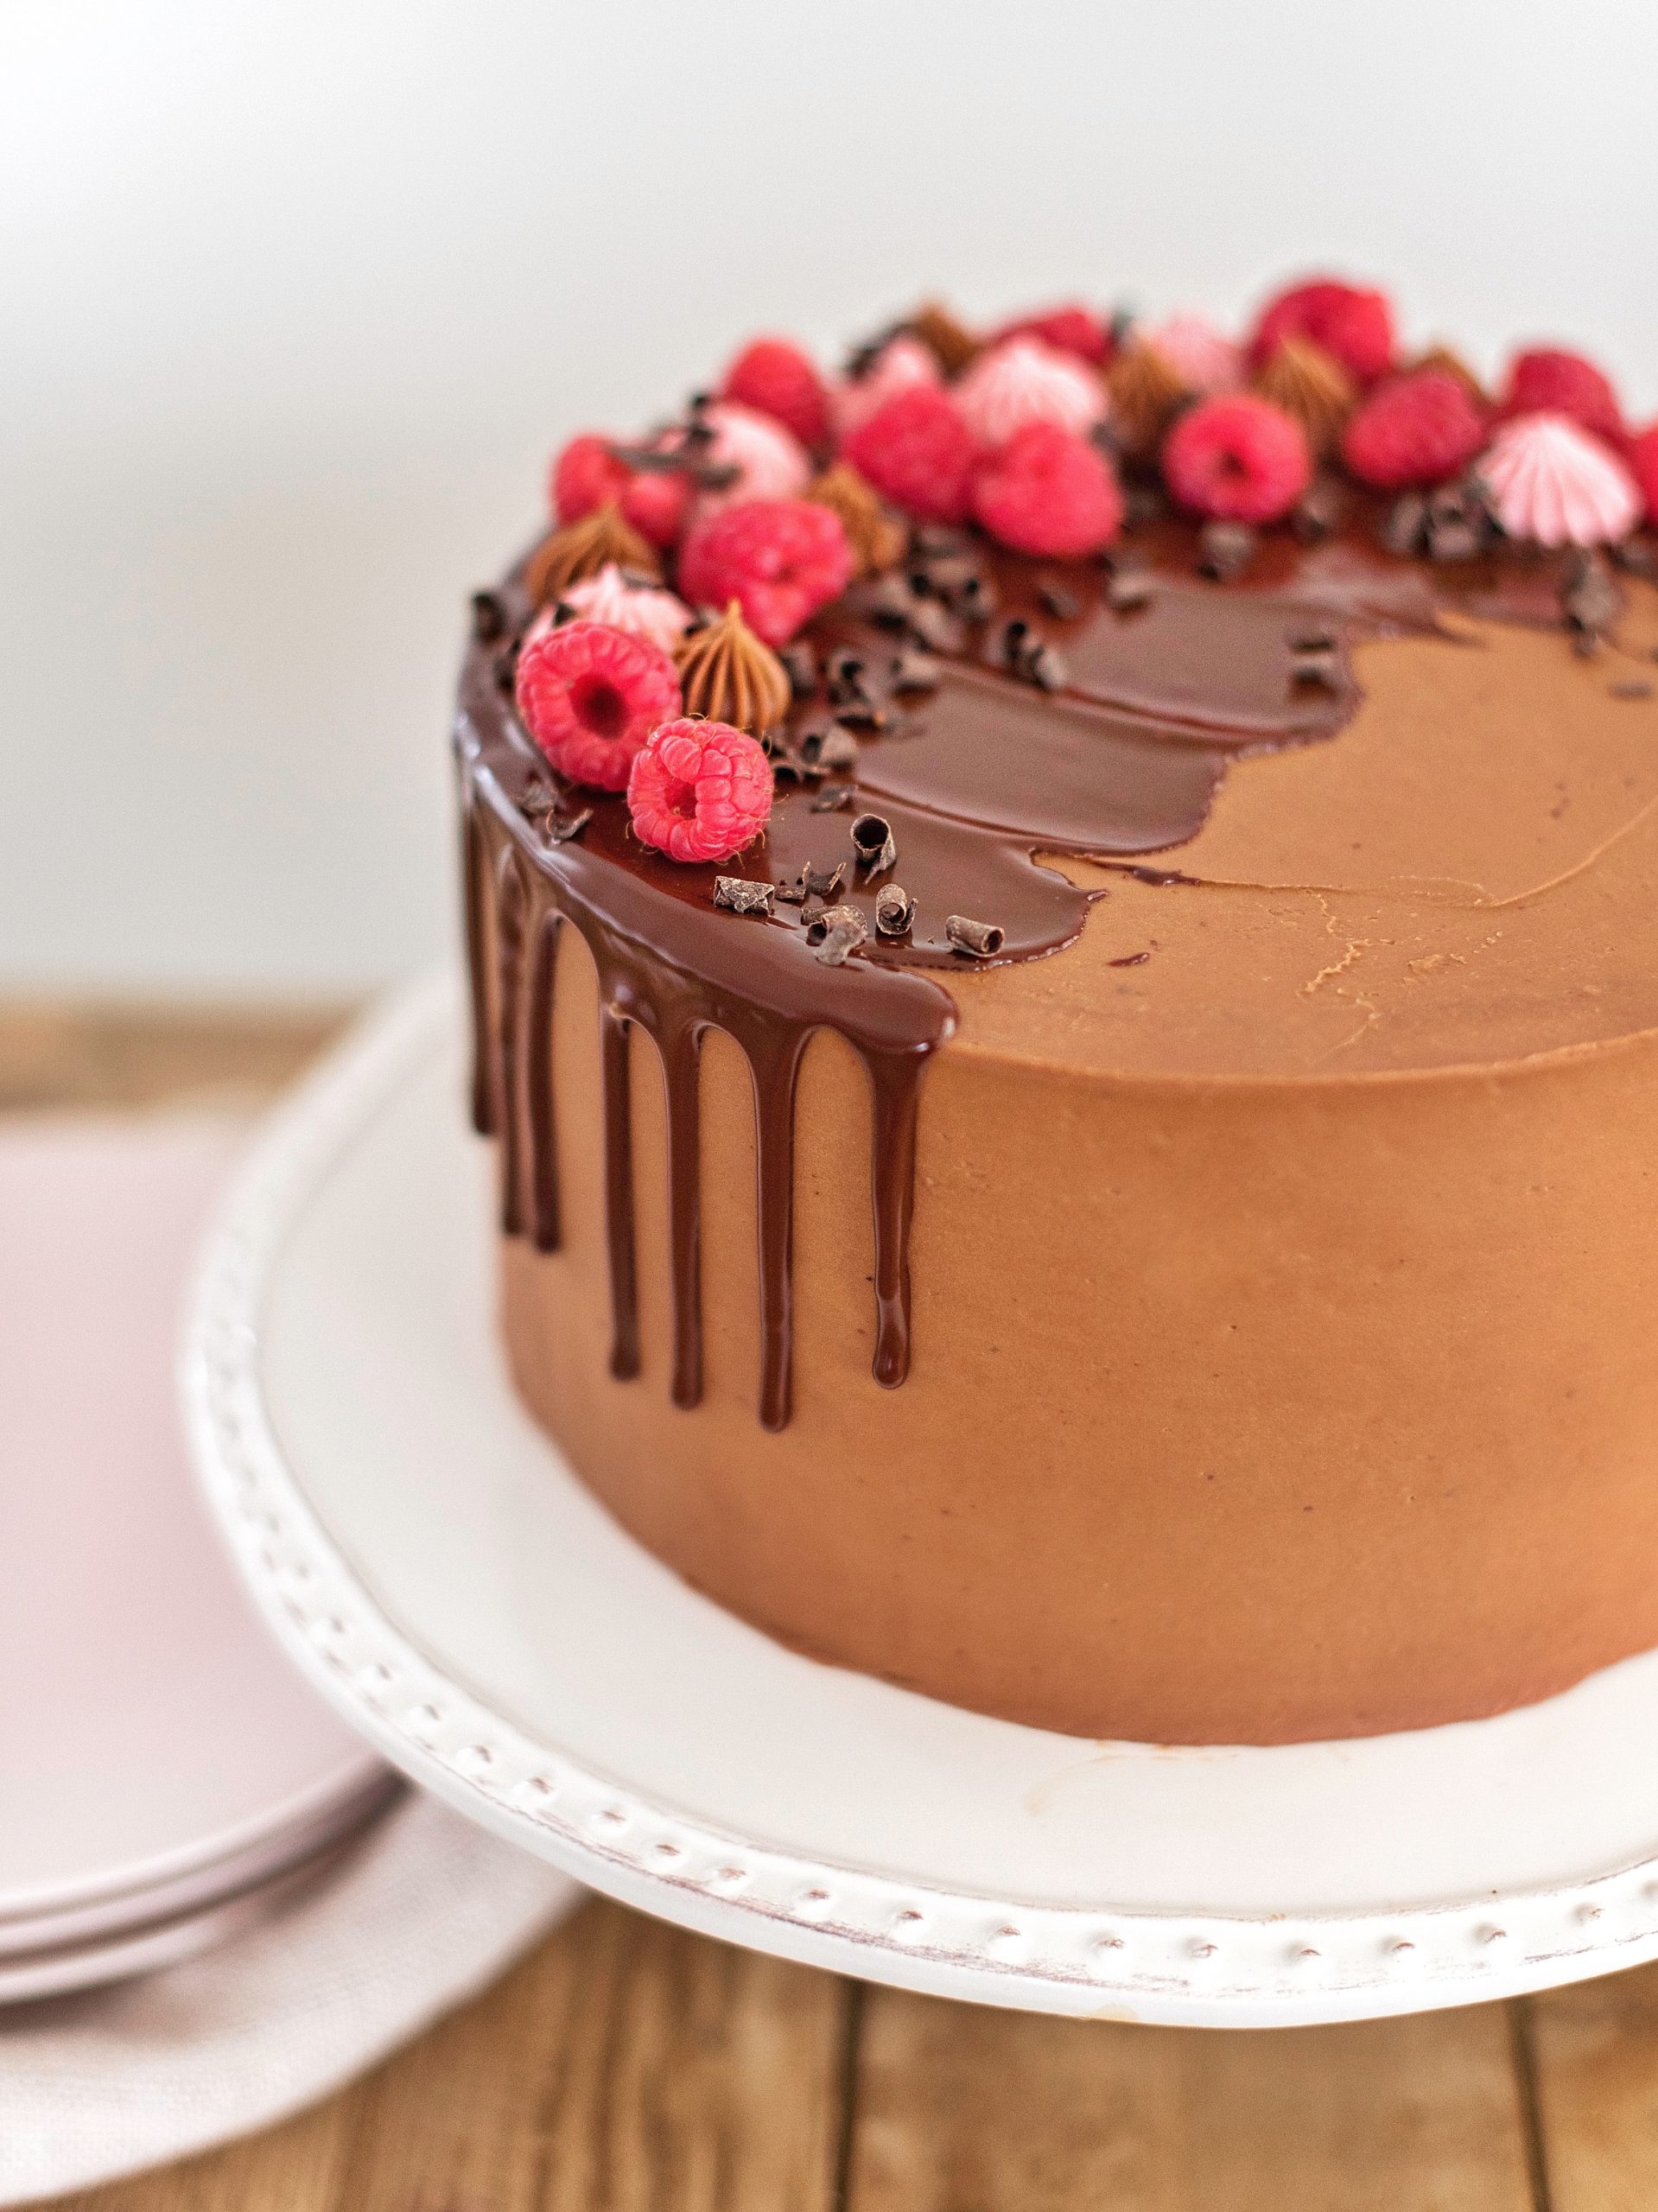 Fudge Brownie Cake with Chocolate Ganache - Use Your Noodles